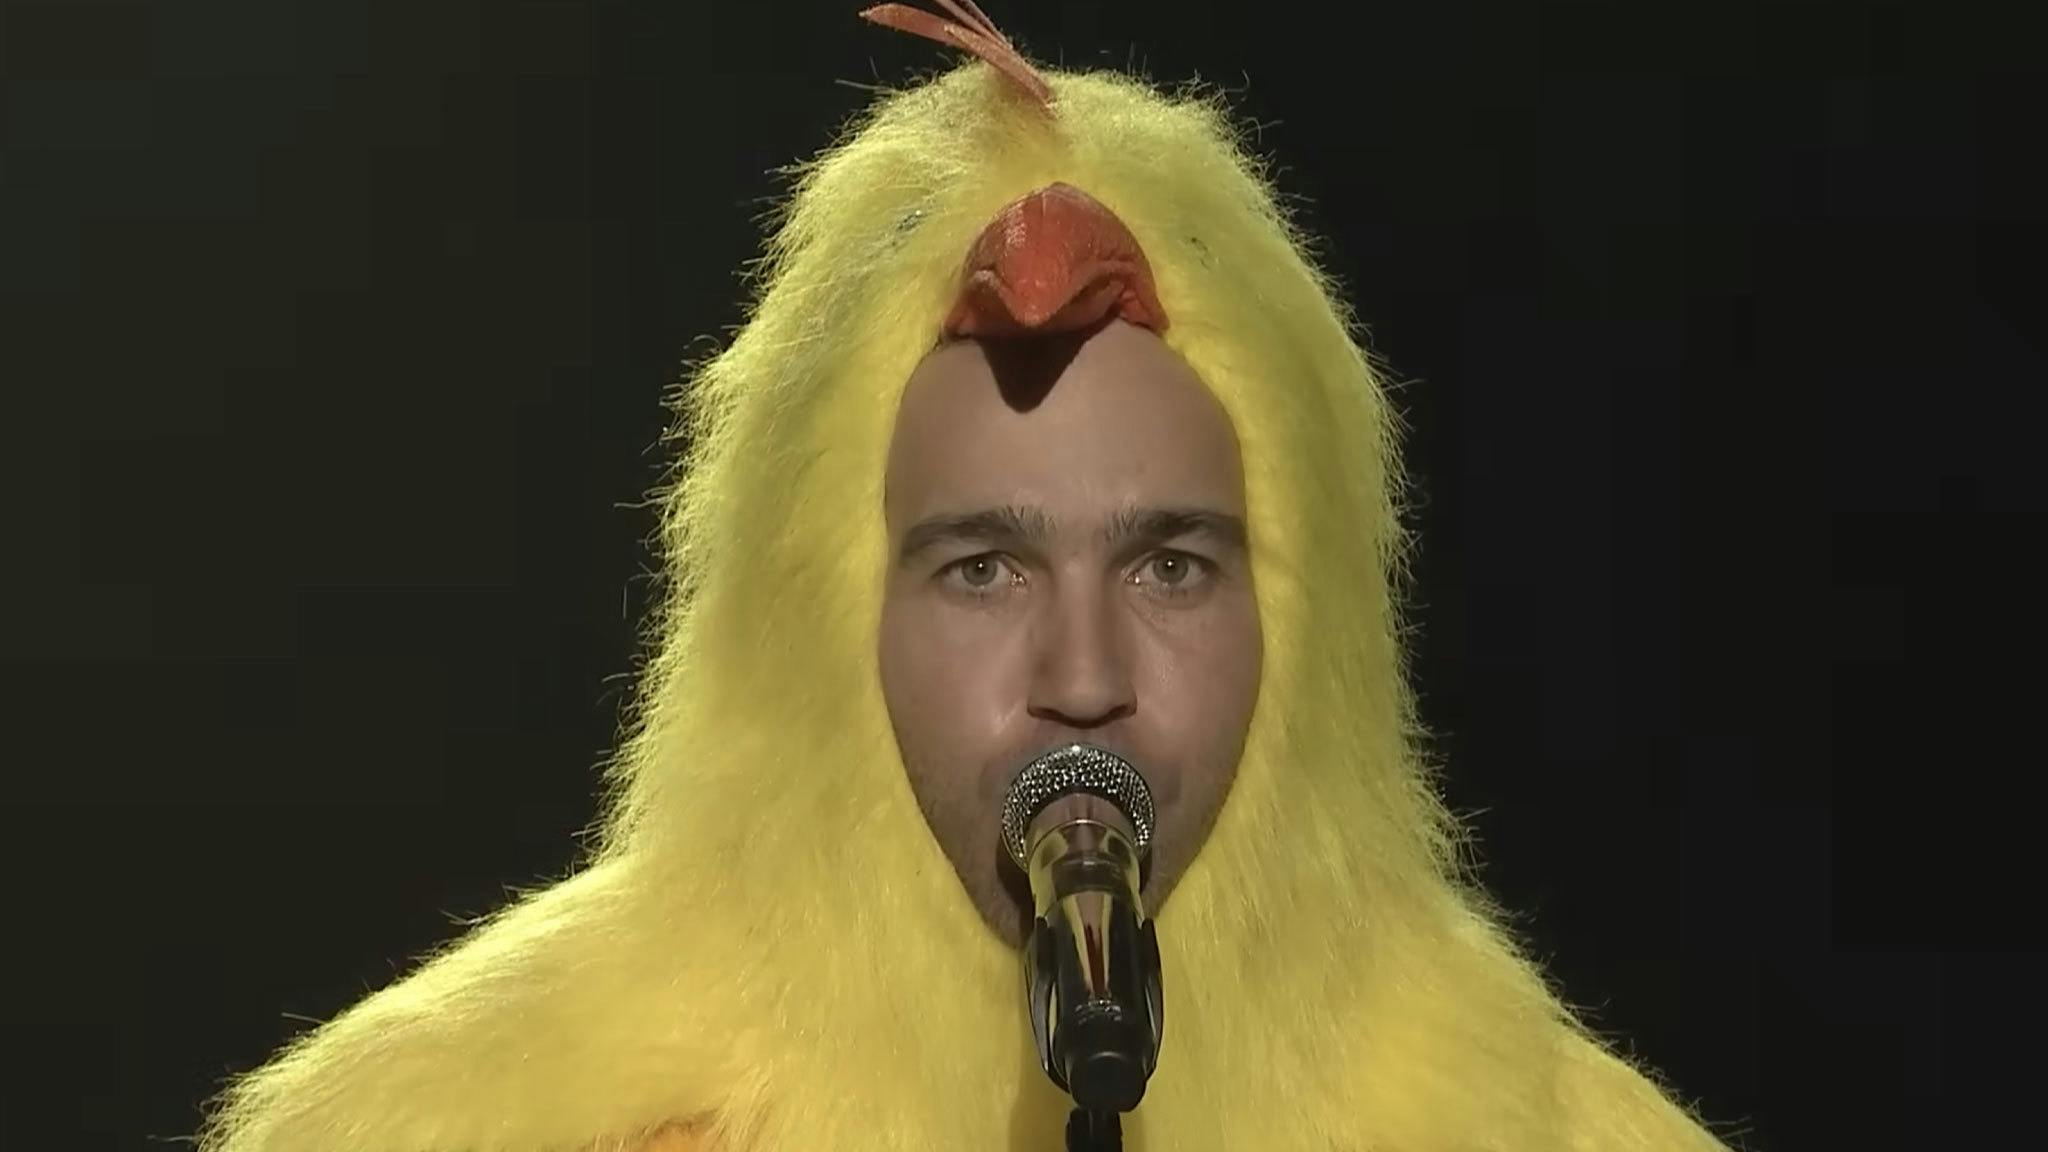 Fall Out Boy dress up as chickens for ‘all-clucking’ version of Sugar, We’re Goin Down